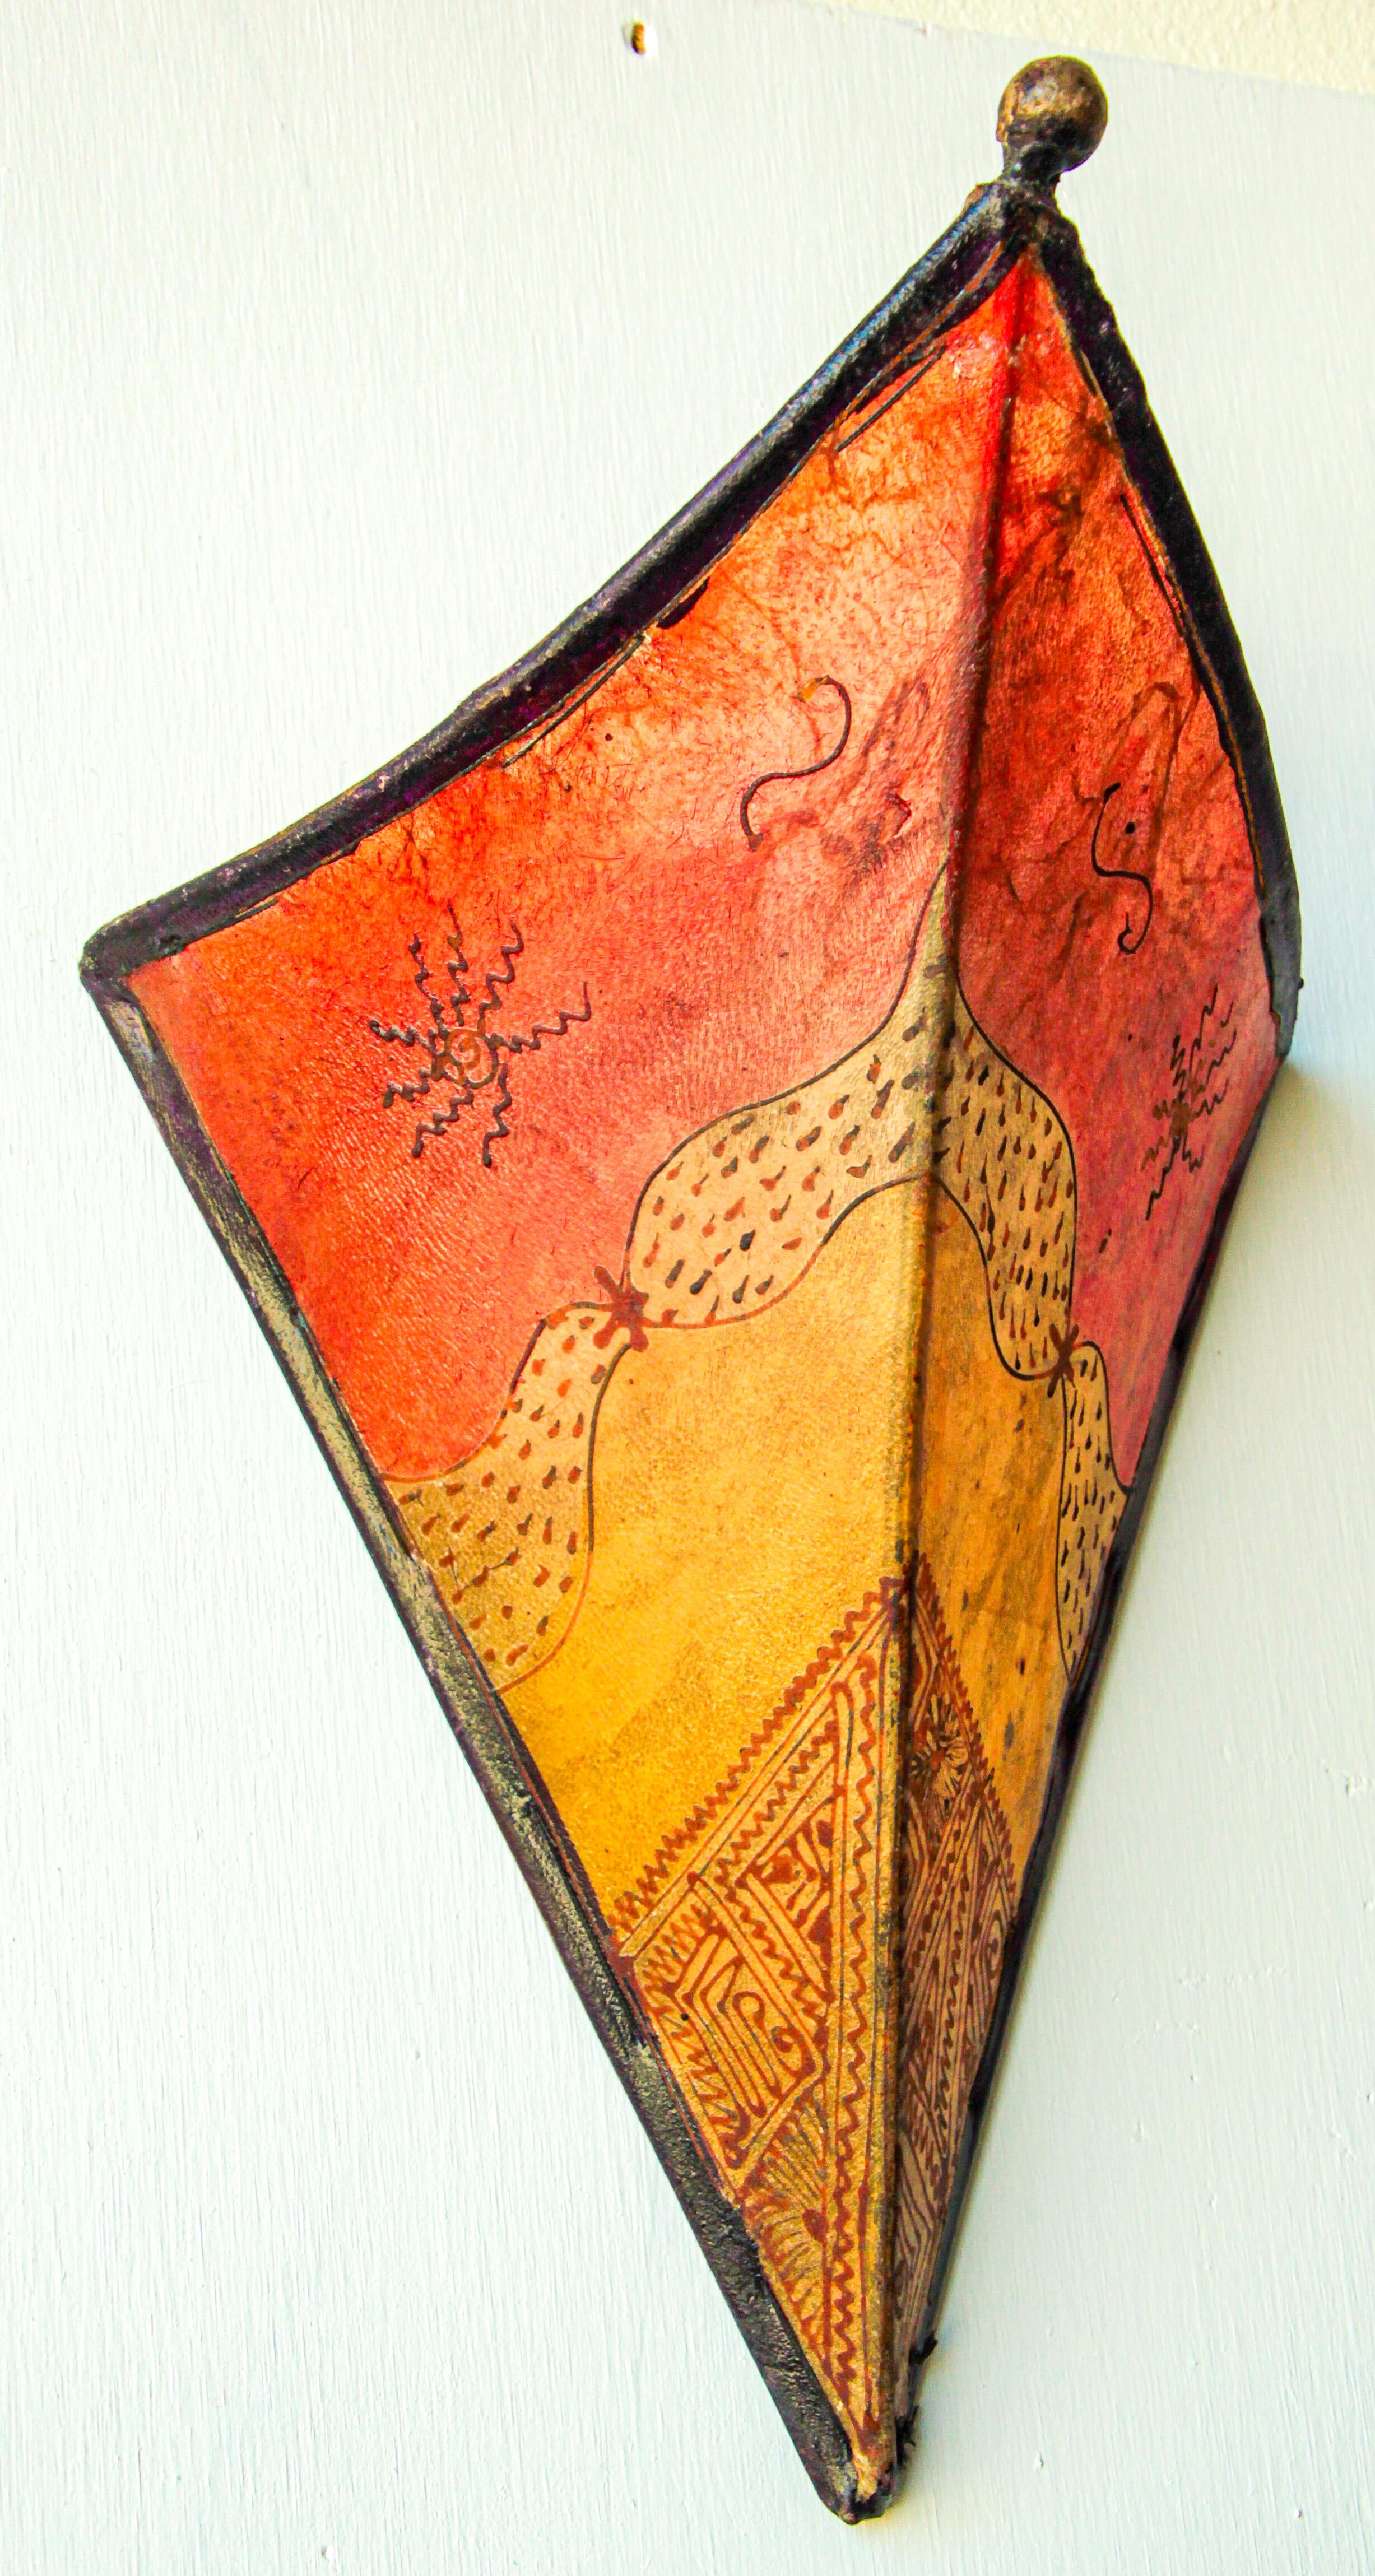 African Tribal Art parchment wall shade sconce featuring a large triangle hide form stitched on iron and hand painted surface.
These Moroccan Art pieces could be used as wall lamp shade.
Iron frame covered with hide parchment which has been